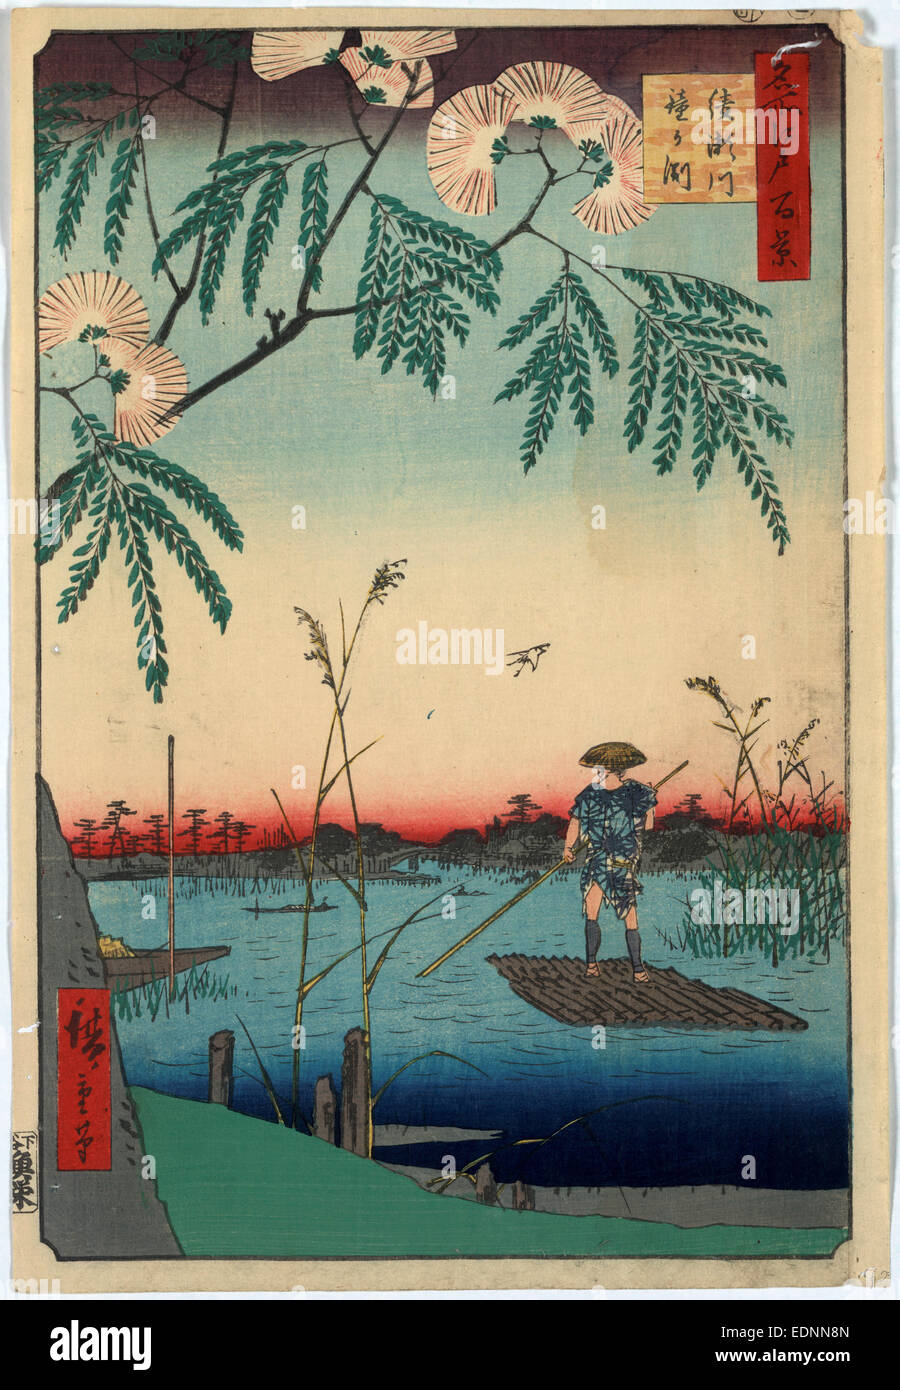 Ayasegawa kanegafuchi, Ayase River and Kanegafuchi., Ando, Hiroshige, 1797-1858, artist, 1857., 1 print : woodcut, color ; 35.5 x 24.2 cm., Print shows a man poling a raft among reeds in marsh area of river with blossoming mimosa(?) tree in the foreground. Stock Photo